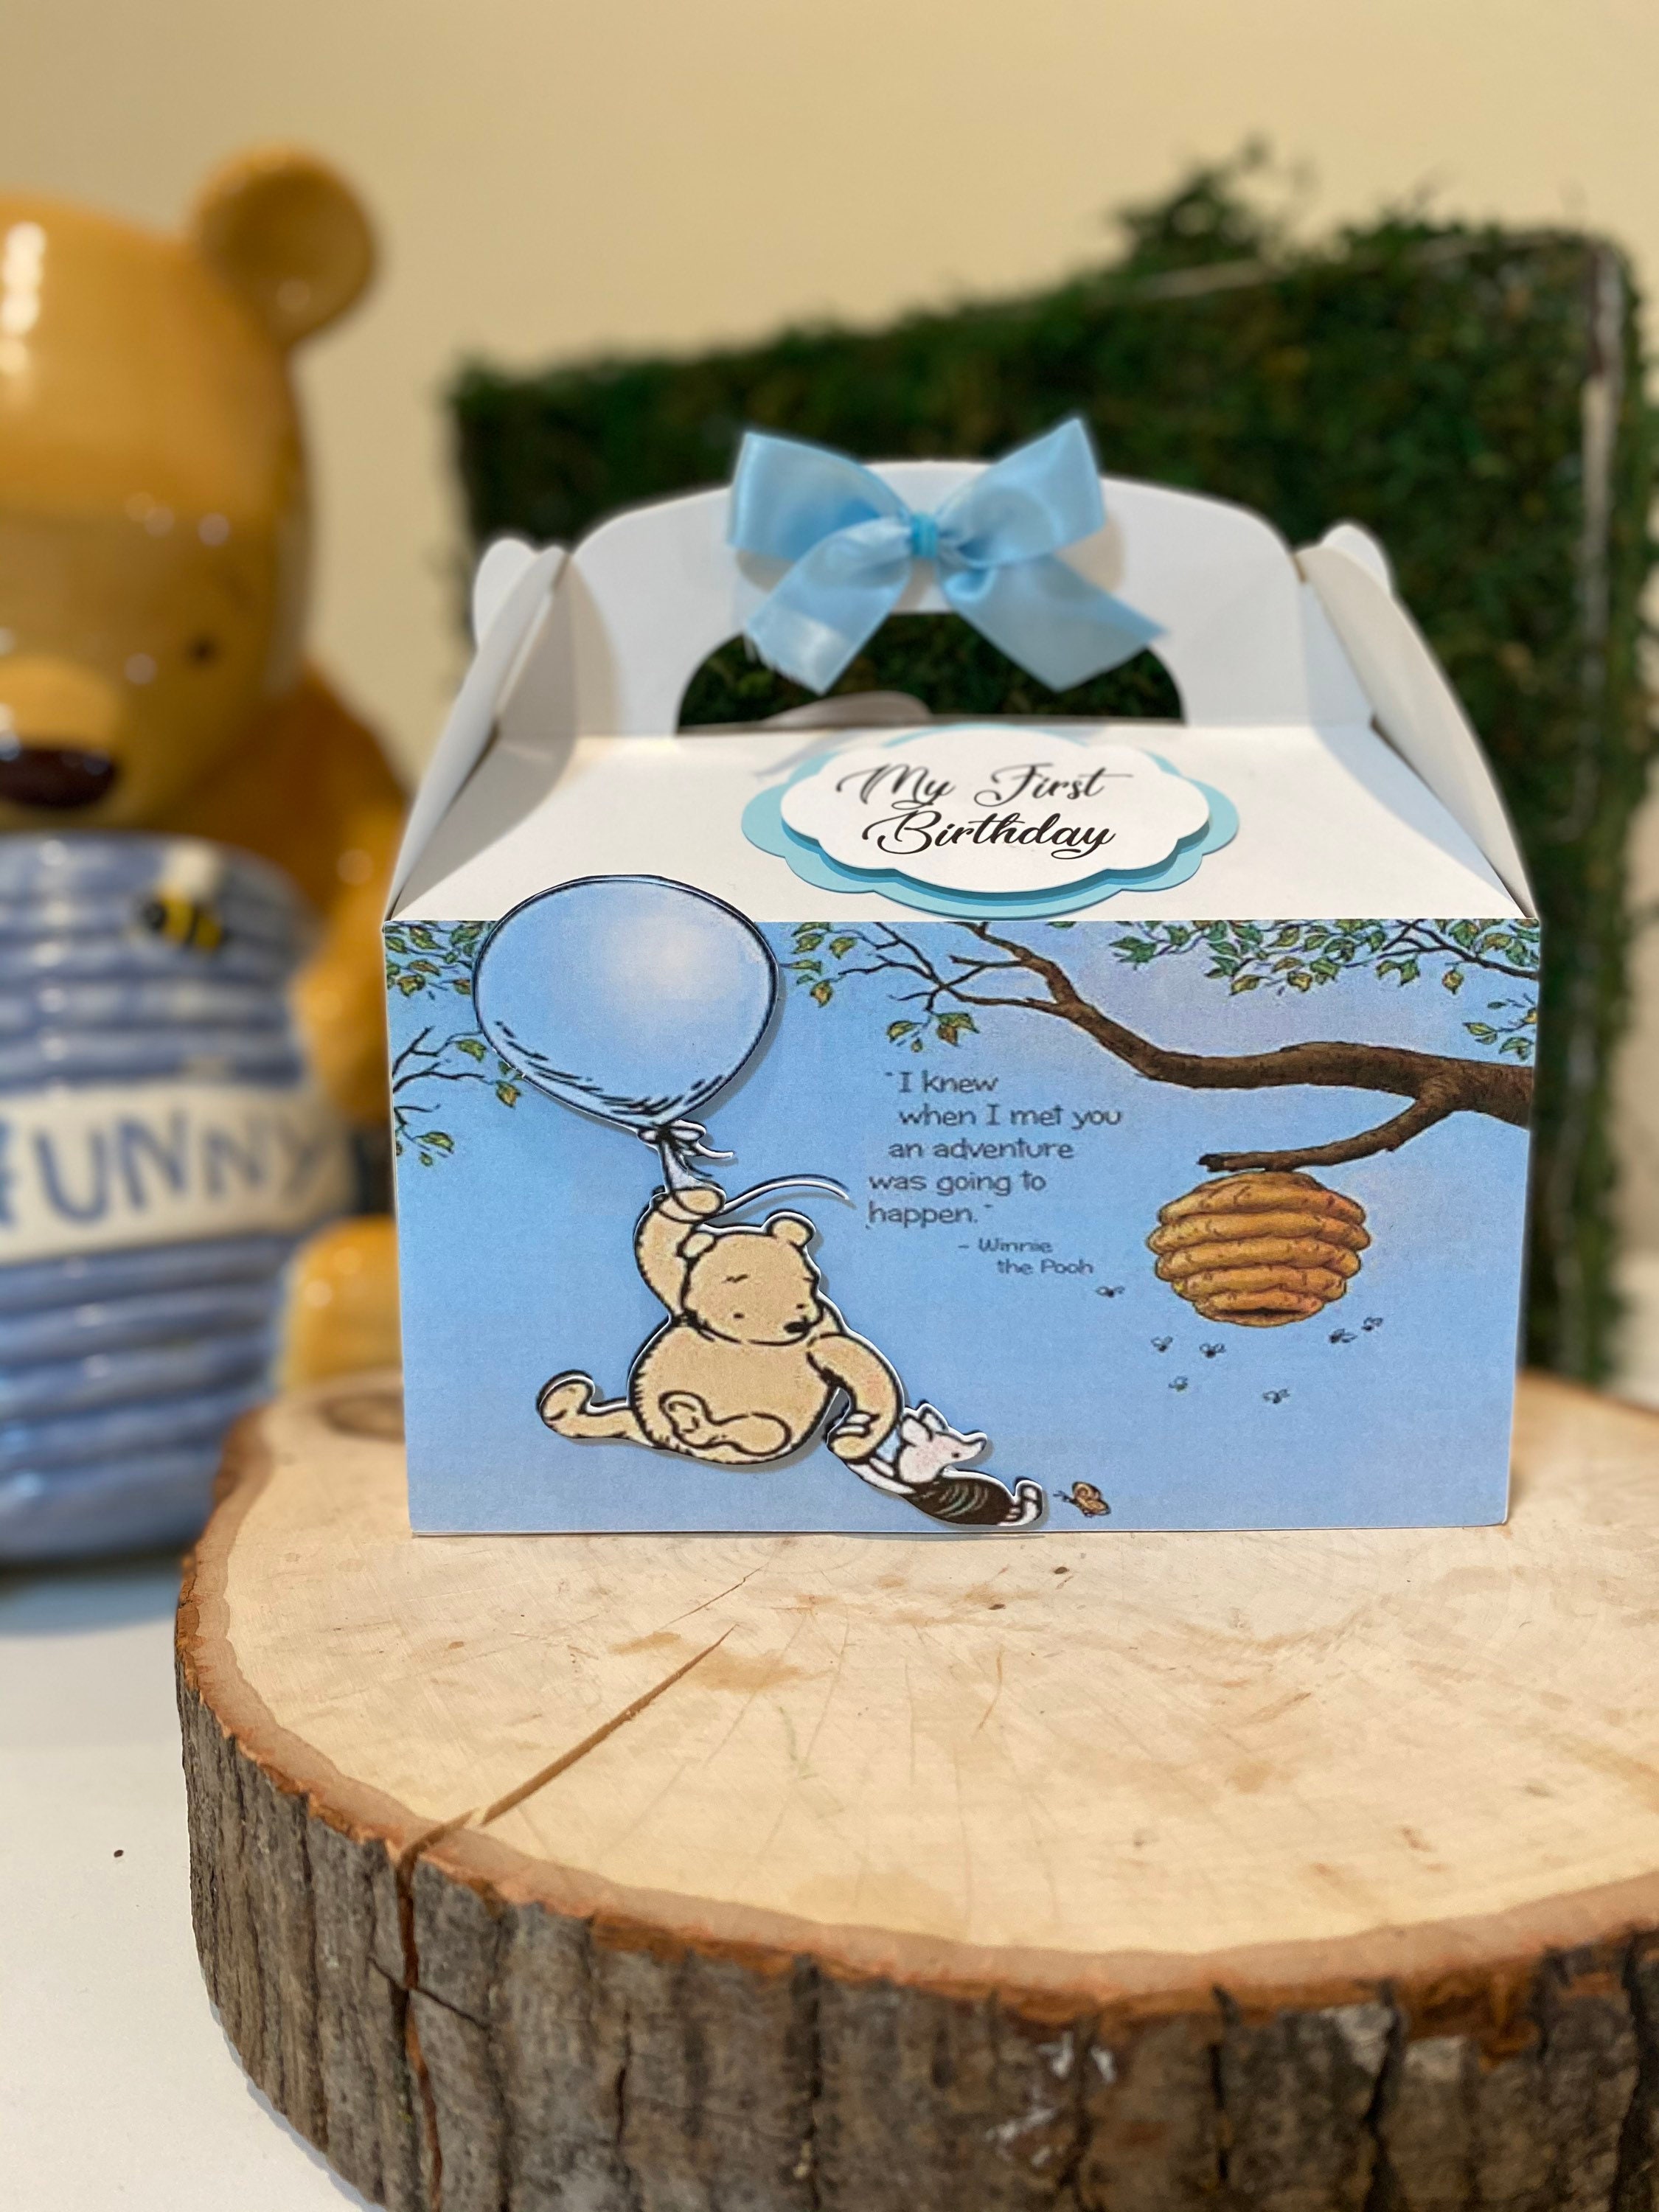 SumDirect Paper Beehive Gift Boxes - 50Pcs Wedding Favor Candy Boxes with  Ribbons,Yellow Winnie The Pooh Baby Shower Bee Gift Box for Birthday